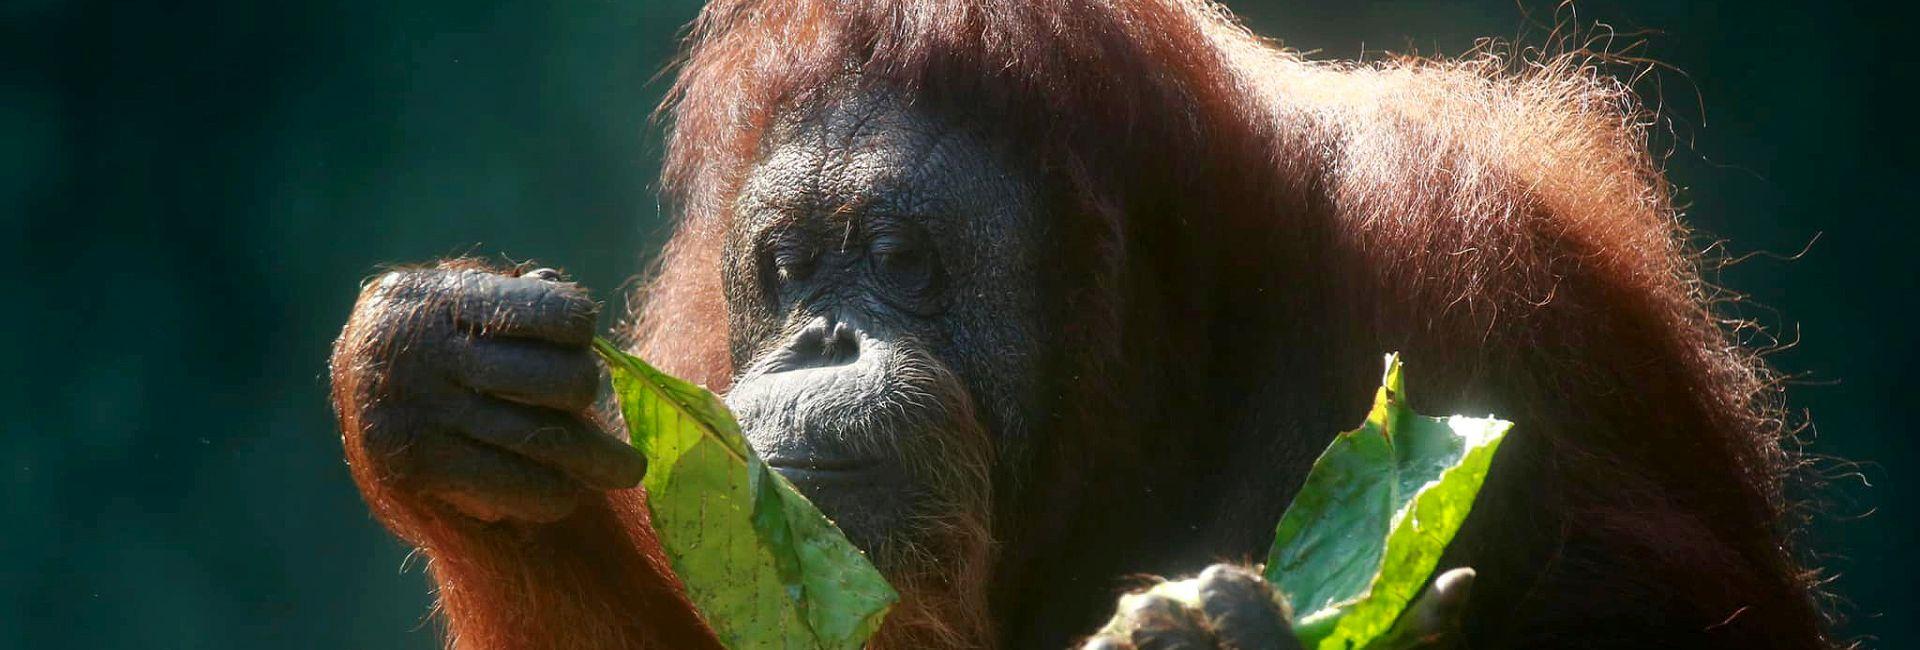 The Latest From The Great Orangutan Project!